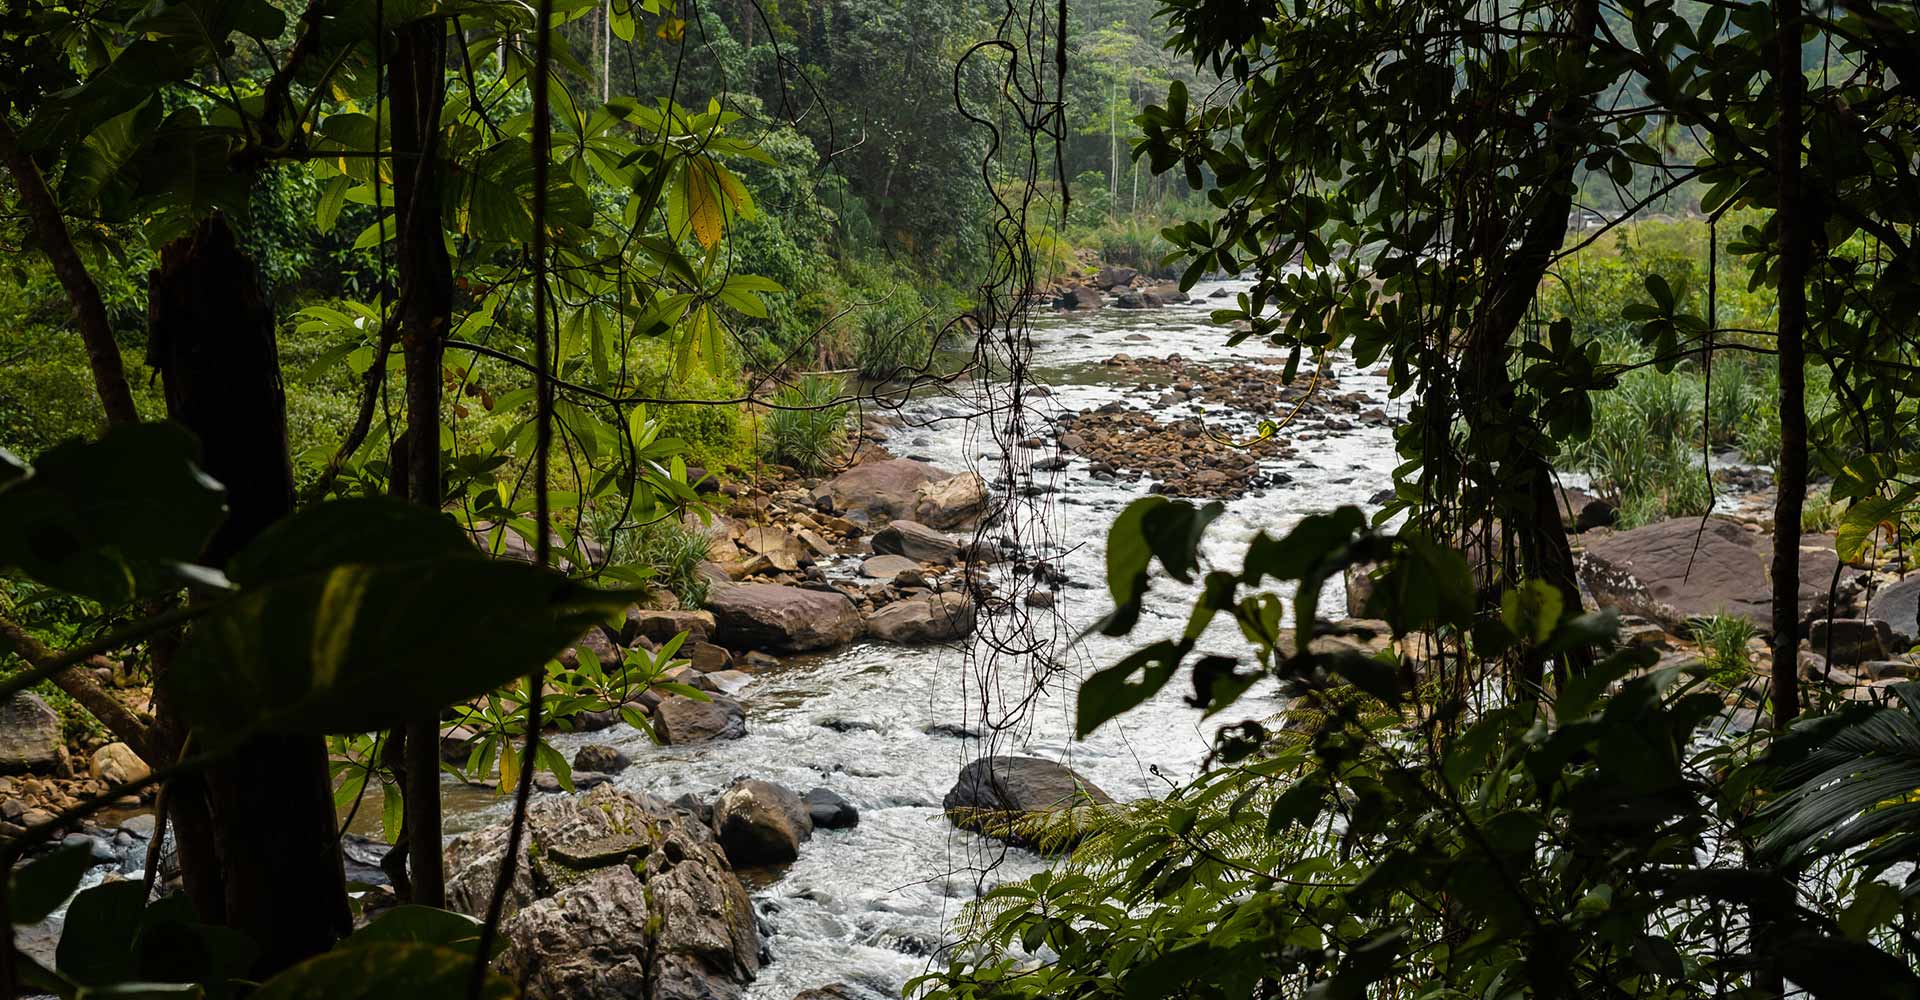 Tranquil waters of Sinharaja rainforest